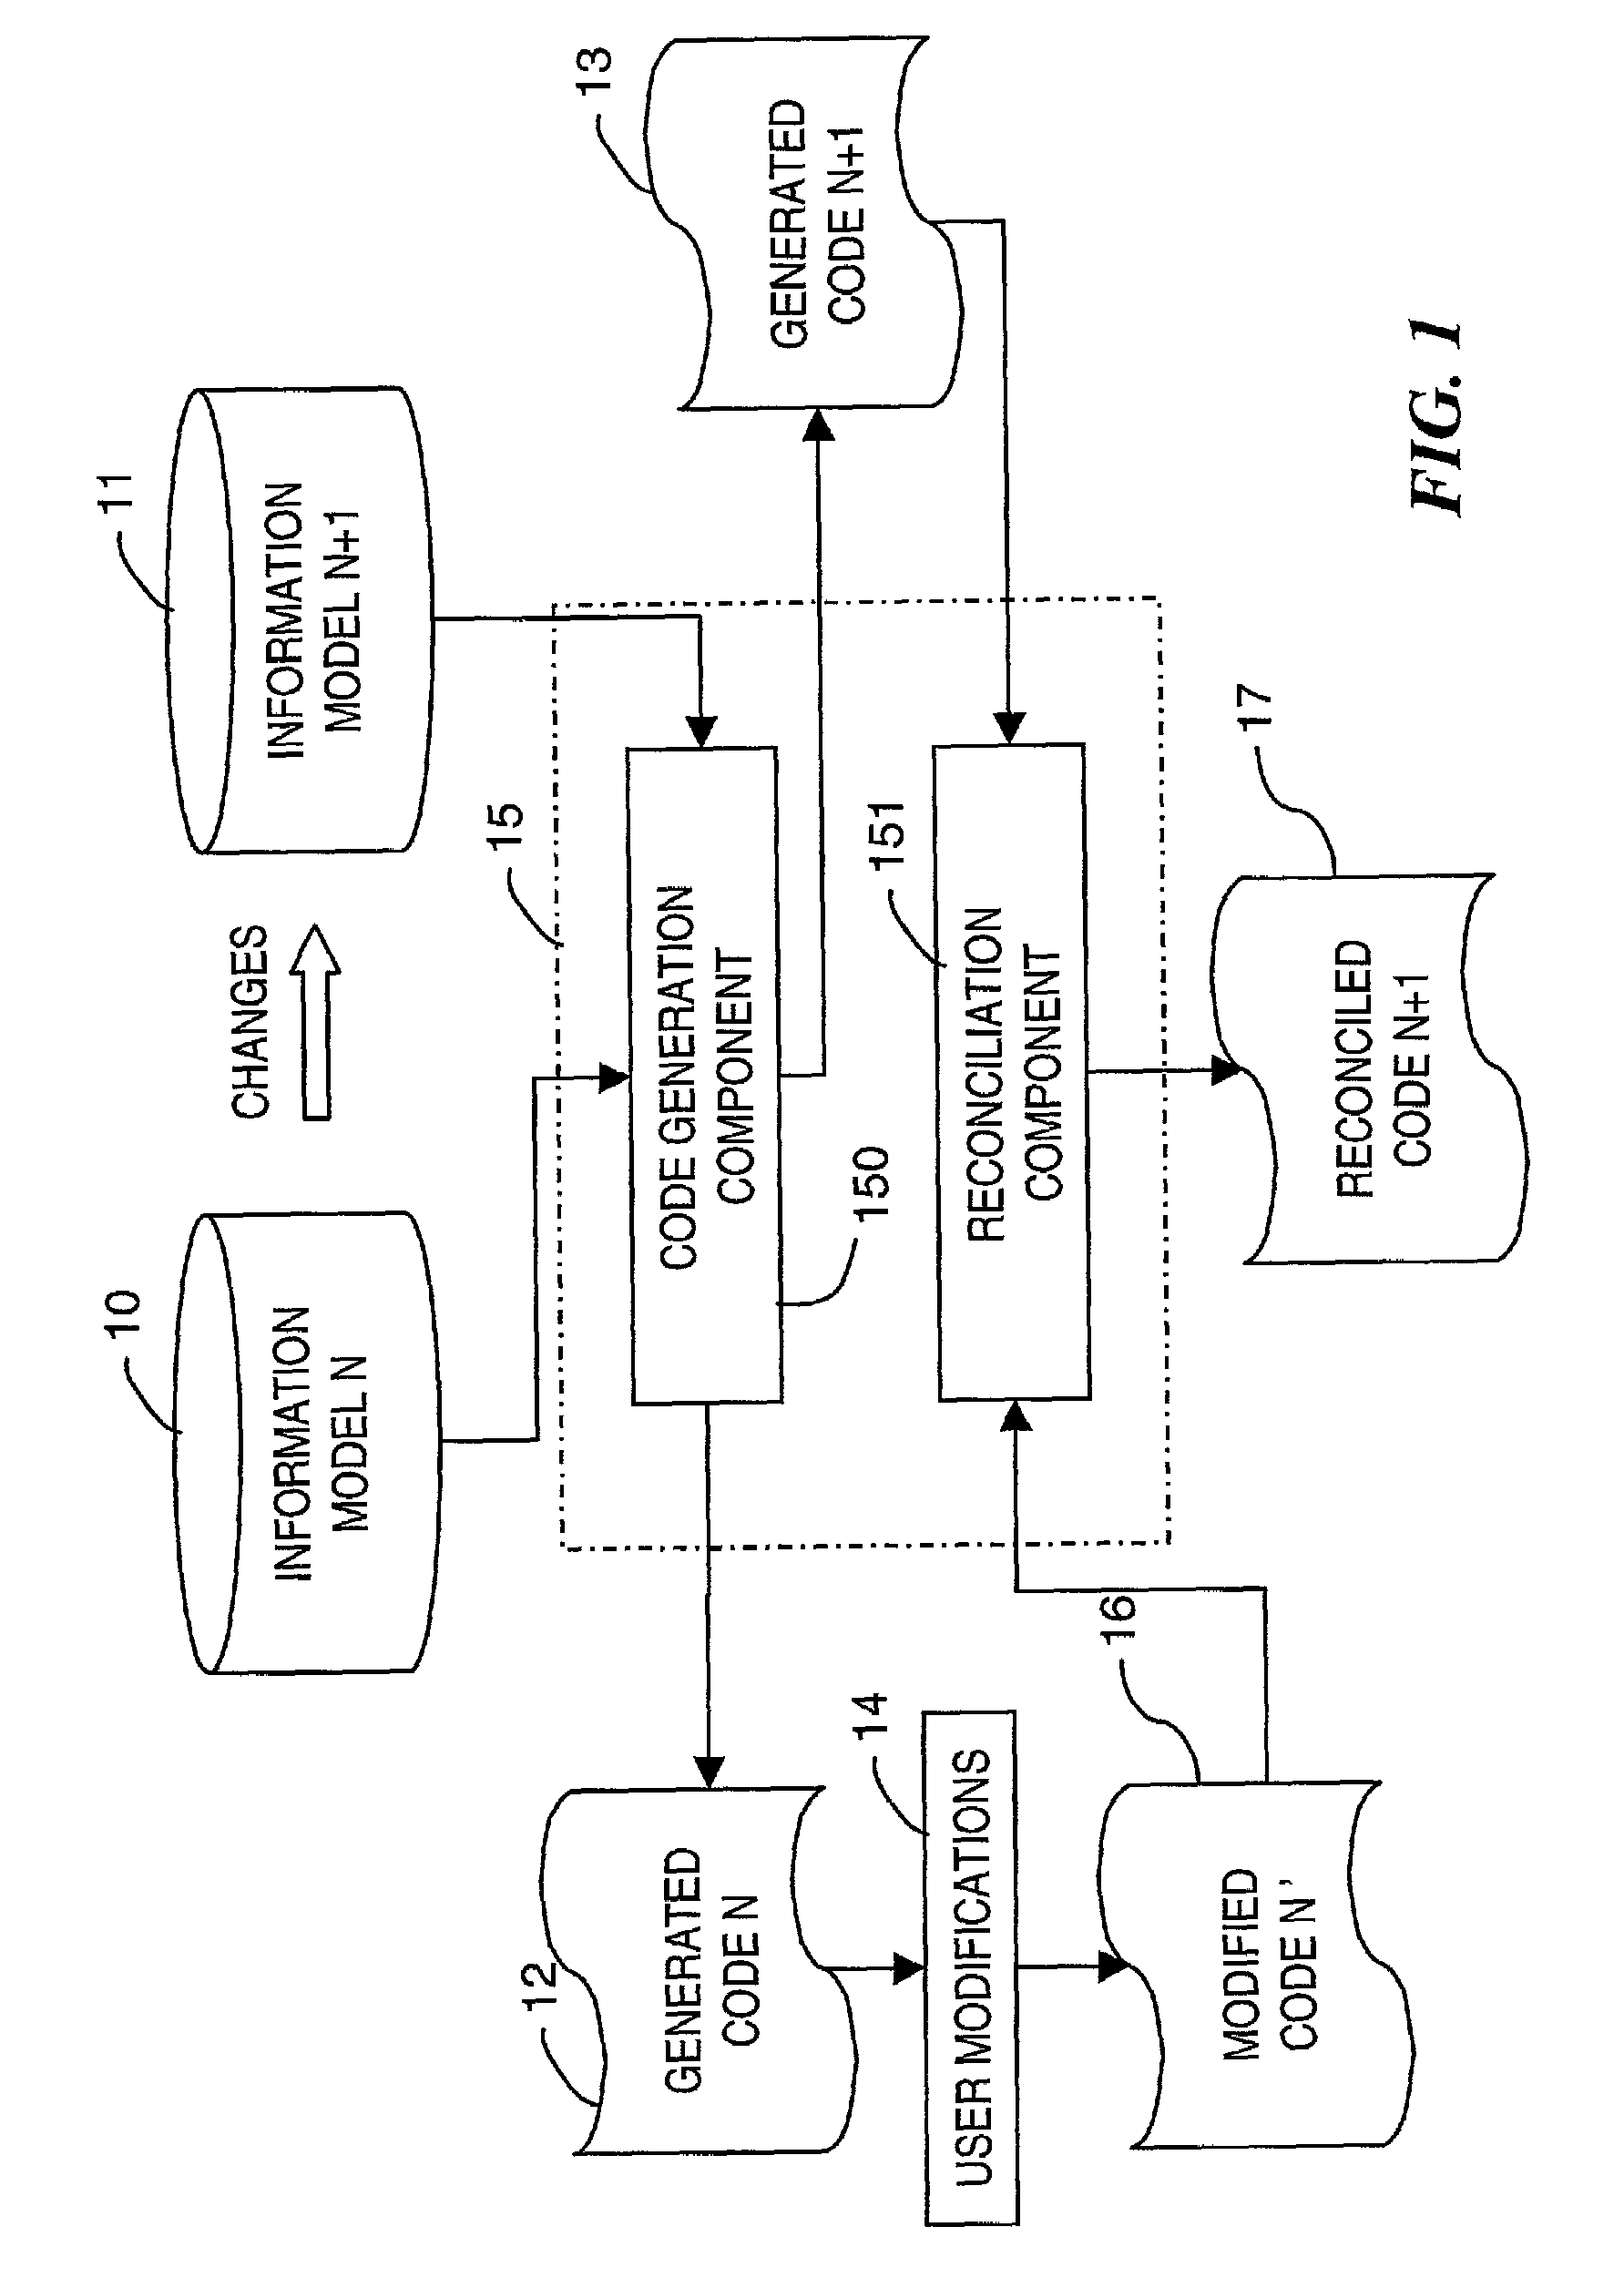 Method and system for generating program source code of a computer application from an information model